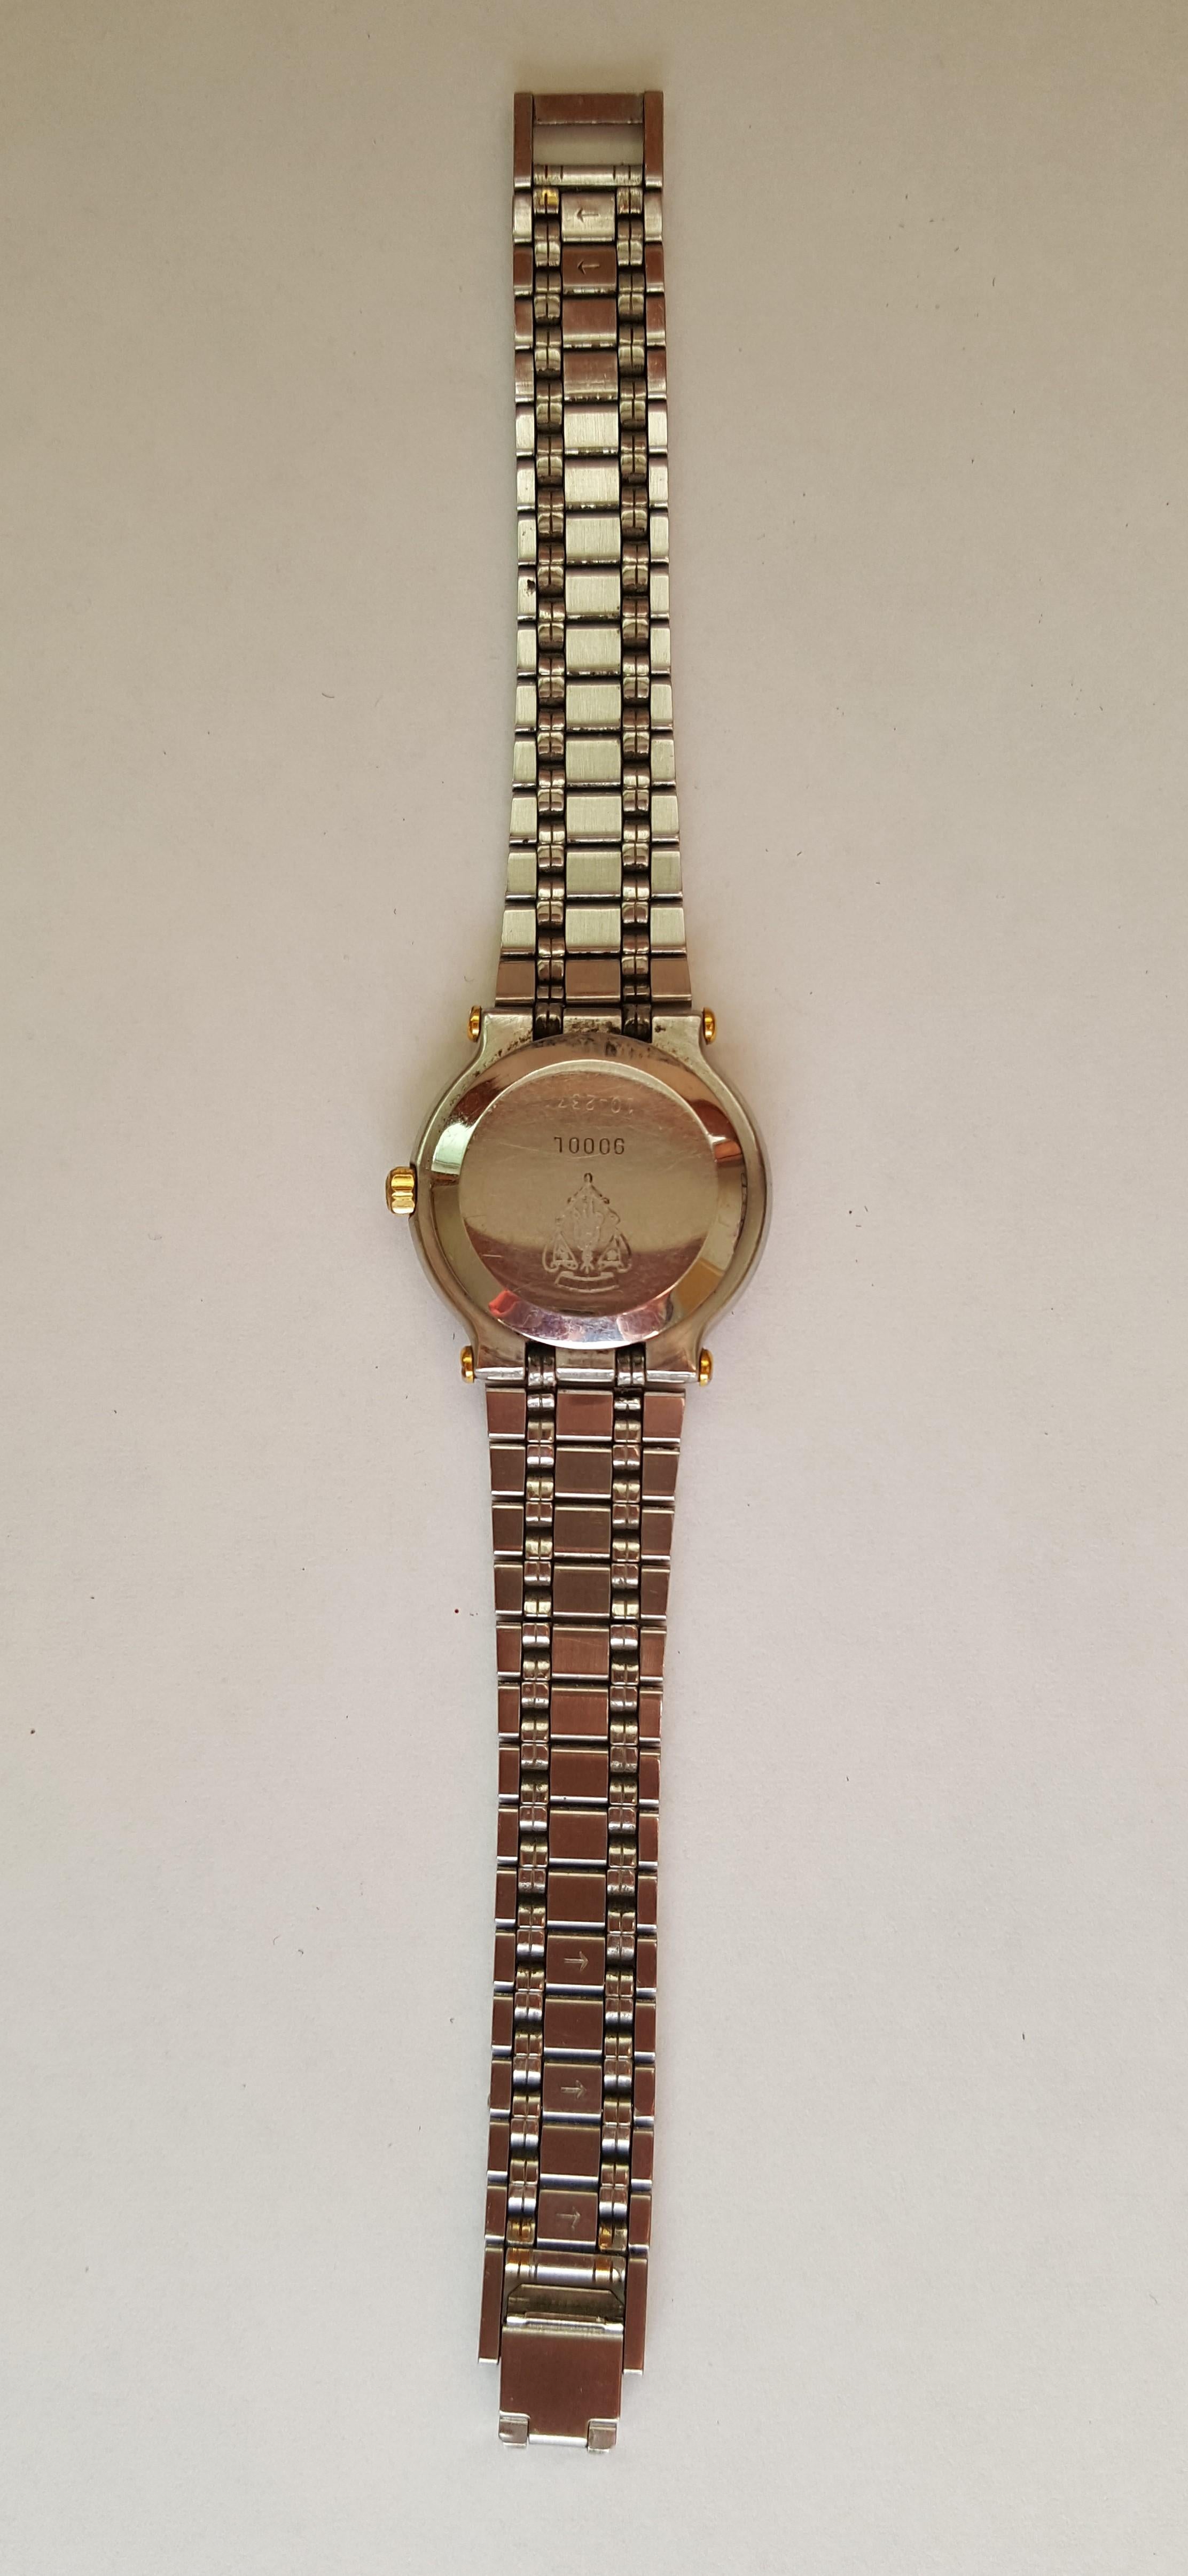 Ladies Vintage Gucci 9000L Watch Stainless Steel with Gold Plating, Quartz, Swiss Made, 25 mm Case, 19mm Crystal, 7mm Thickness, White Face, Date Window. This watch in good condition with wear appropriate for the age. Since this is a vintage watch,